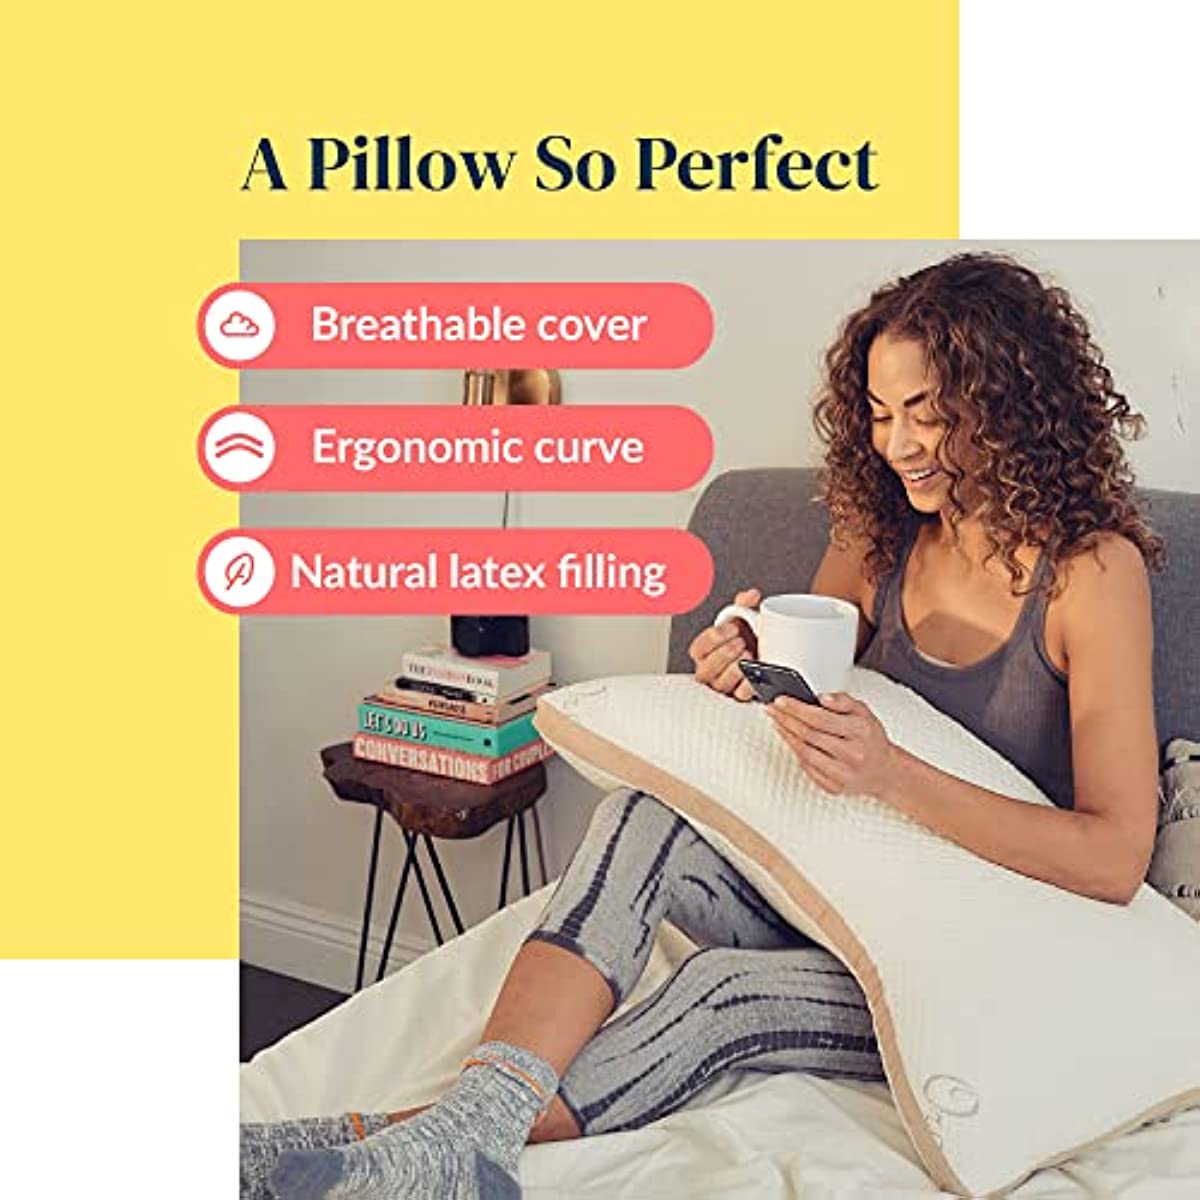 Cut & Sewn Latex Pillow for Side Sleepers - Adjustable Bed Pillow for Sleeping - Curved Pillow for Neck and Shoulder Pain - 100{a4b6bfead34e0a0c1bffdfba887114b21b1f0951947c6e77e134bb9a23fce0f8} Adjustable Loft - Queen Size Pillow 19 inch x 29 inch (Queen)